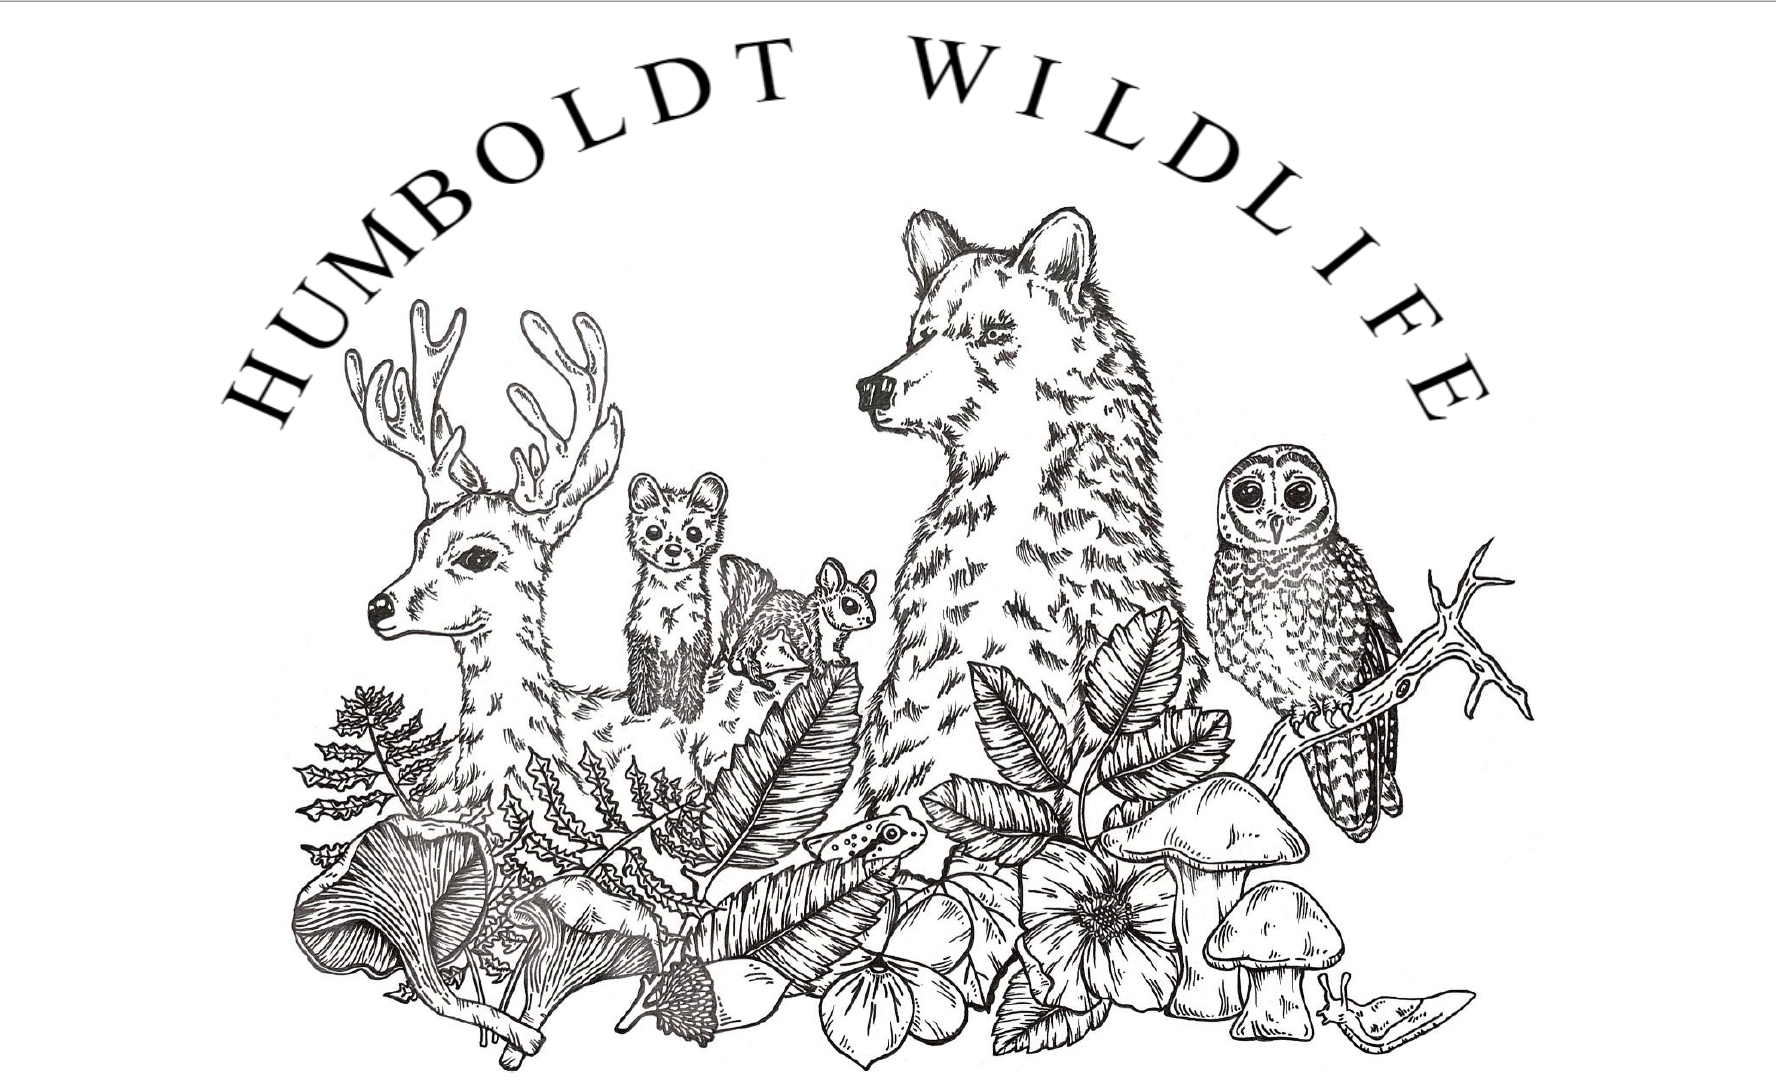 WiGSS Logo with multiple from of wildlife on it